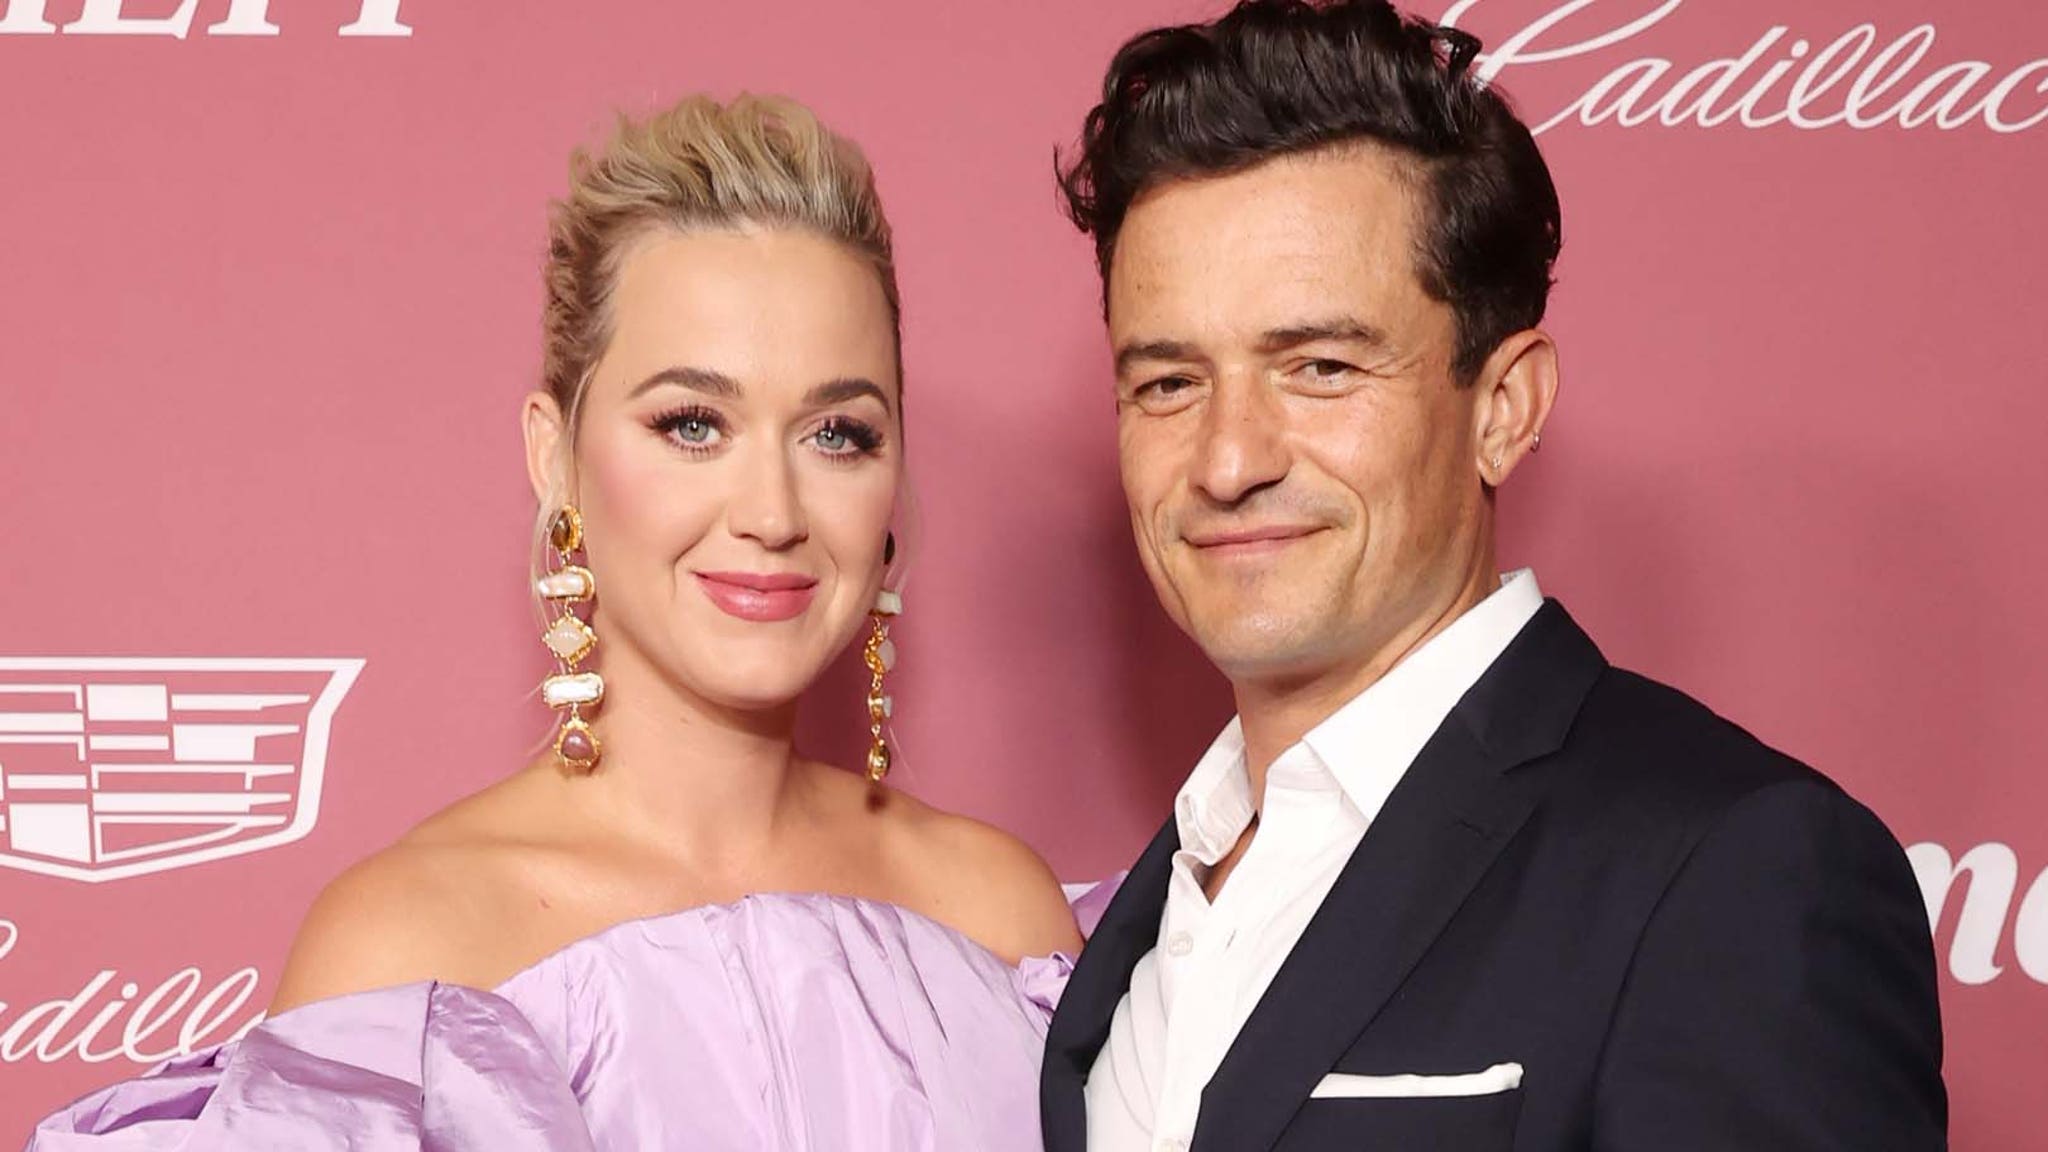 Orlando Bloom Says Katy Perry Demands That He Evolves: 'It Makes For a Lot of Fun And a Lot of Growth'